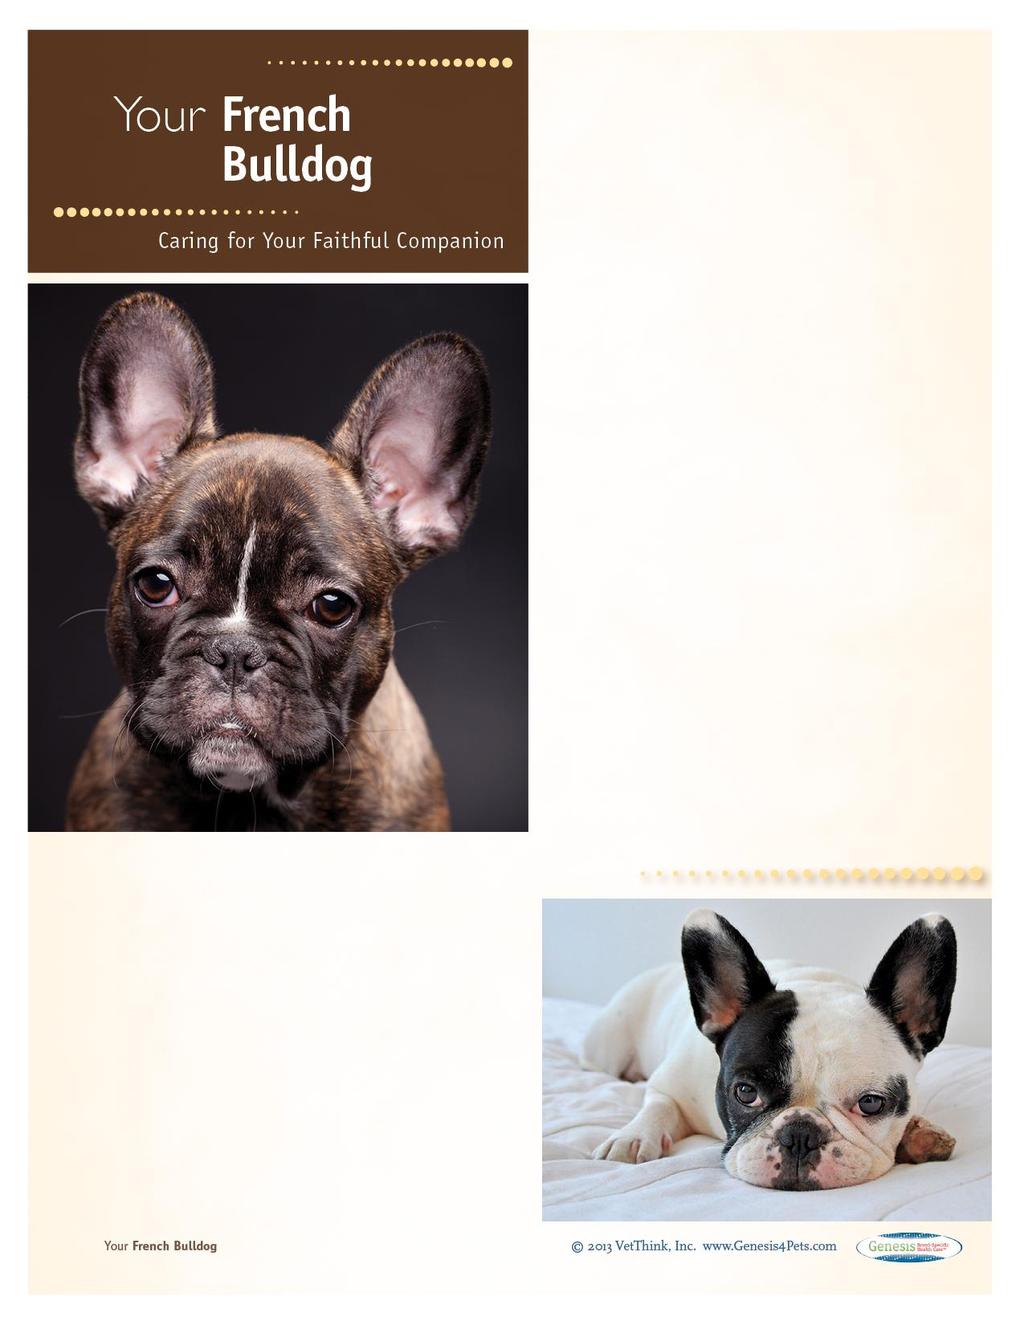 French Bulldogs: What a Unique Breed! Your dog is special! She's your best friend, companion, and a source of unconditional love.